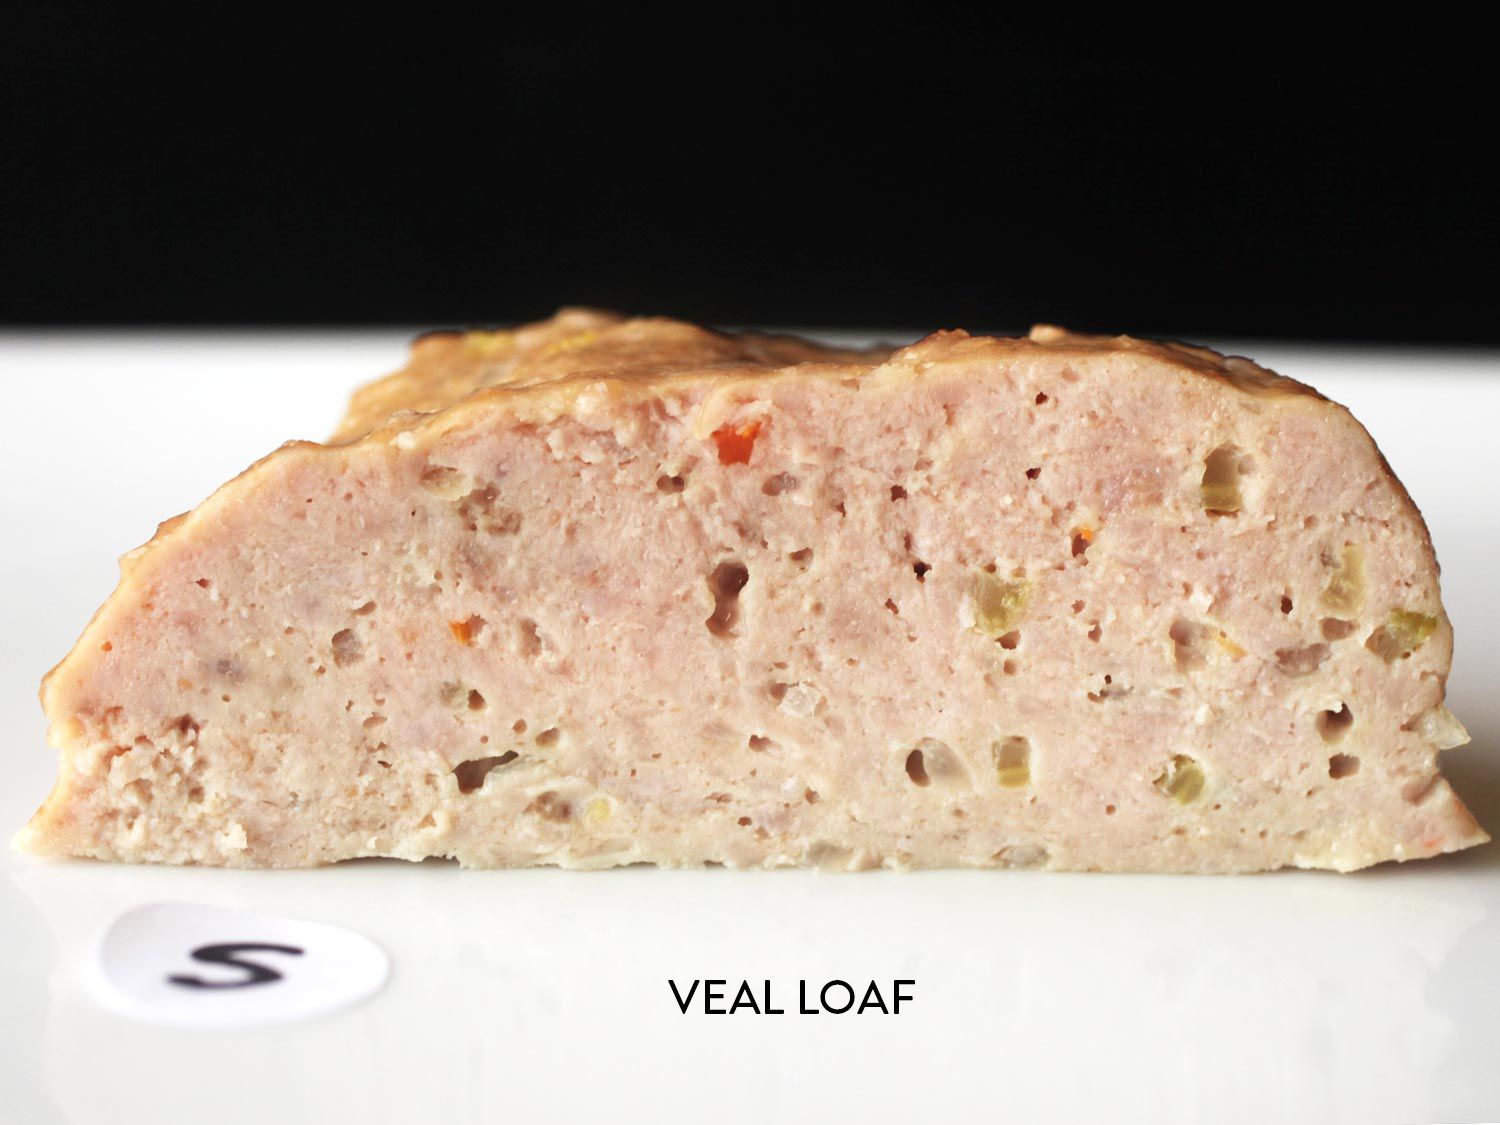 a cross-section of meatloaf made with all veal